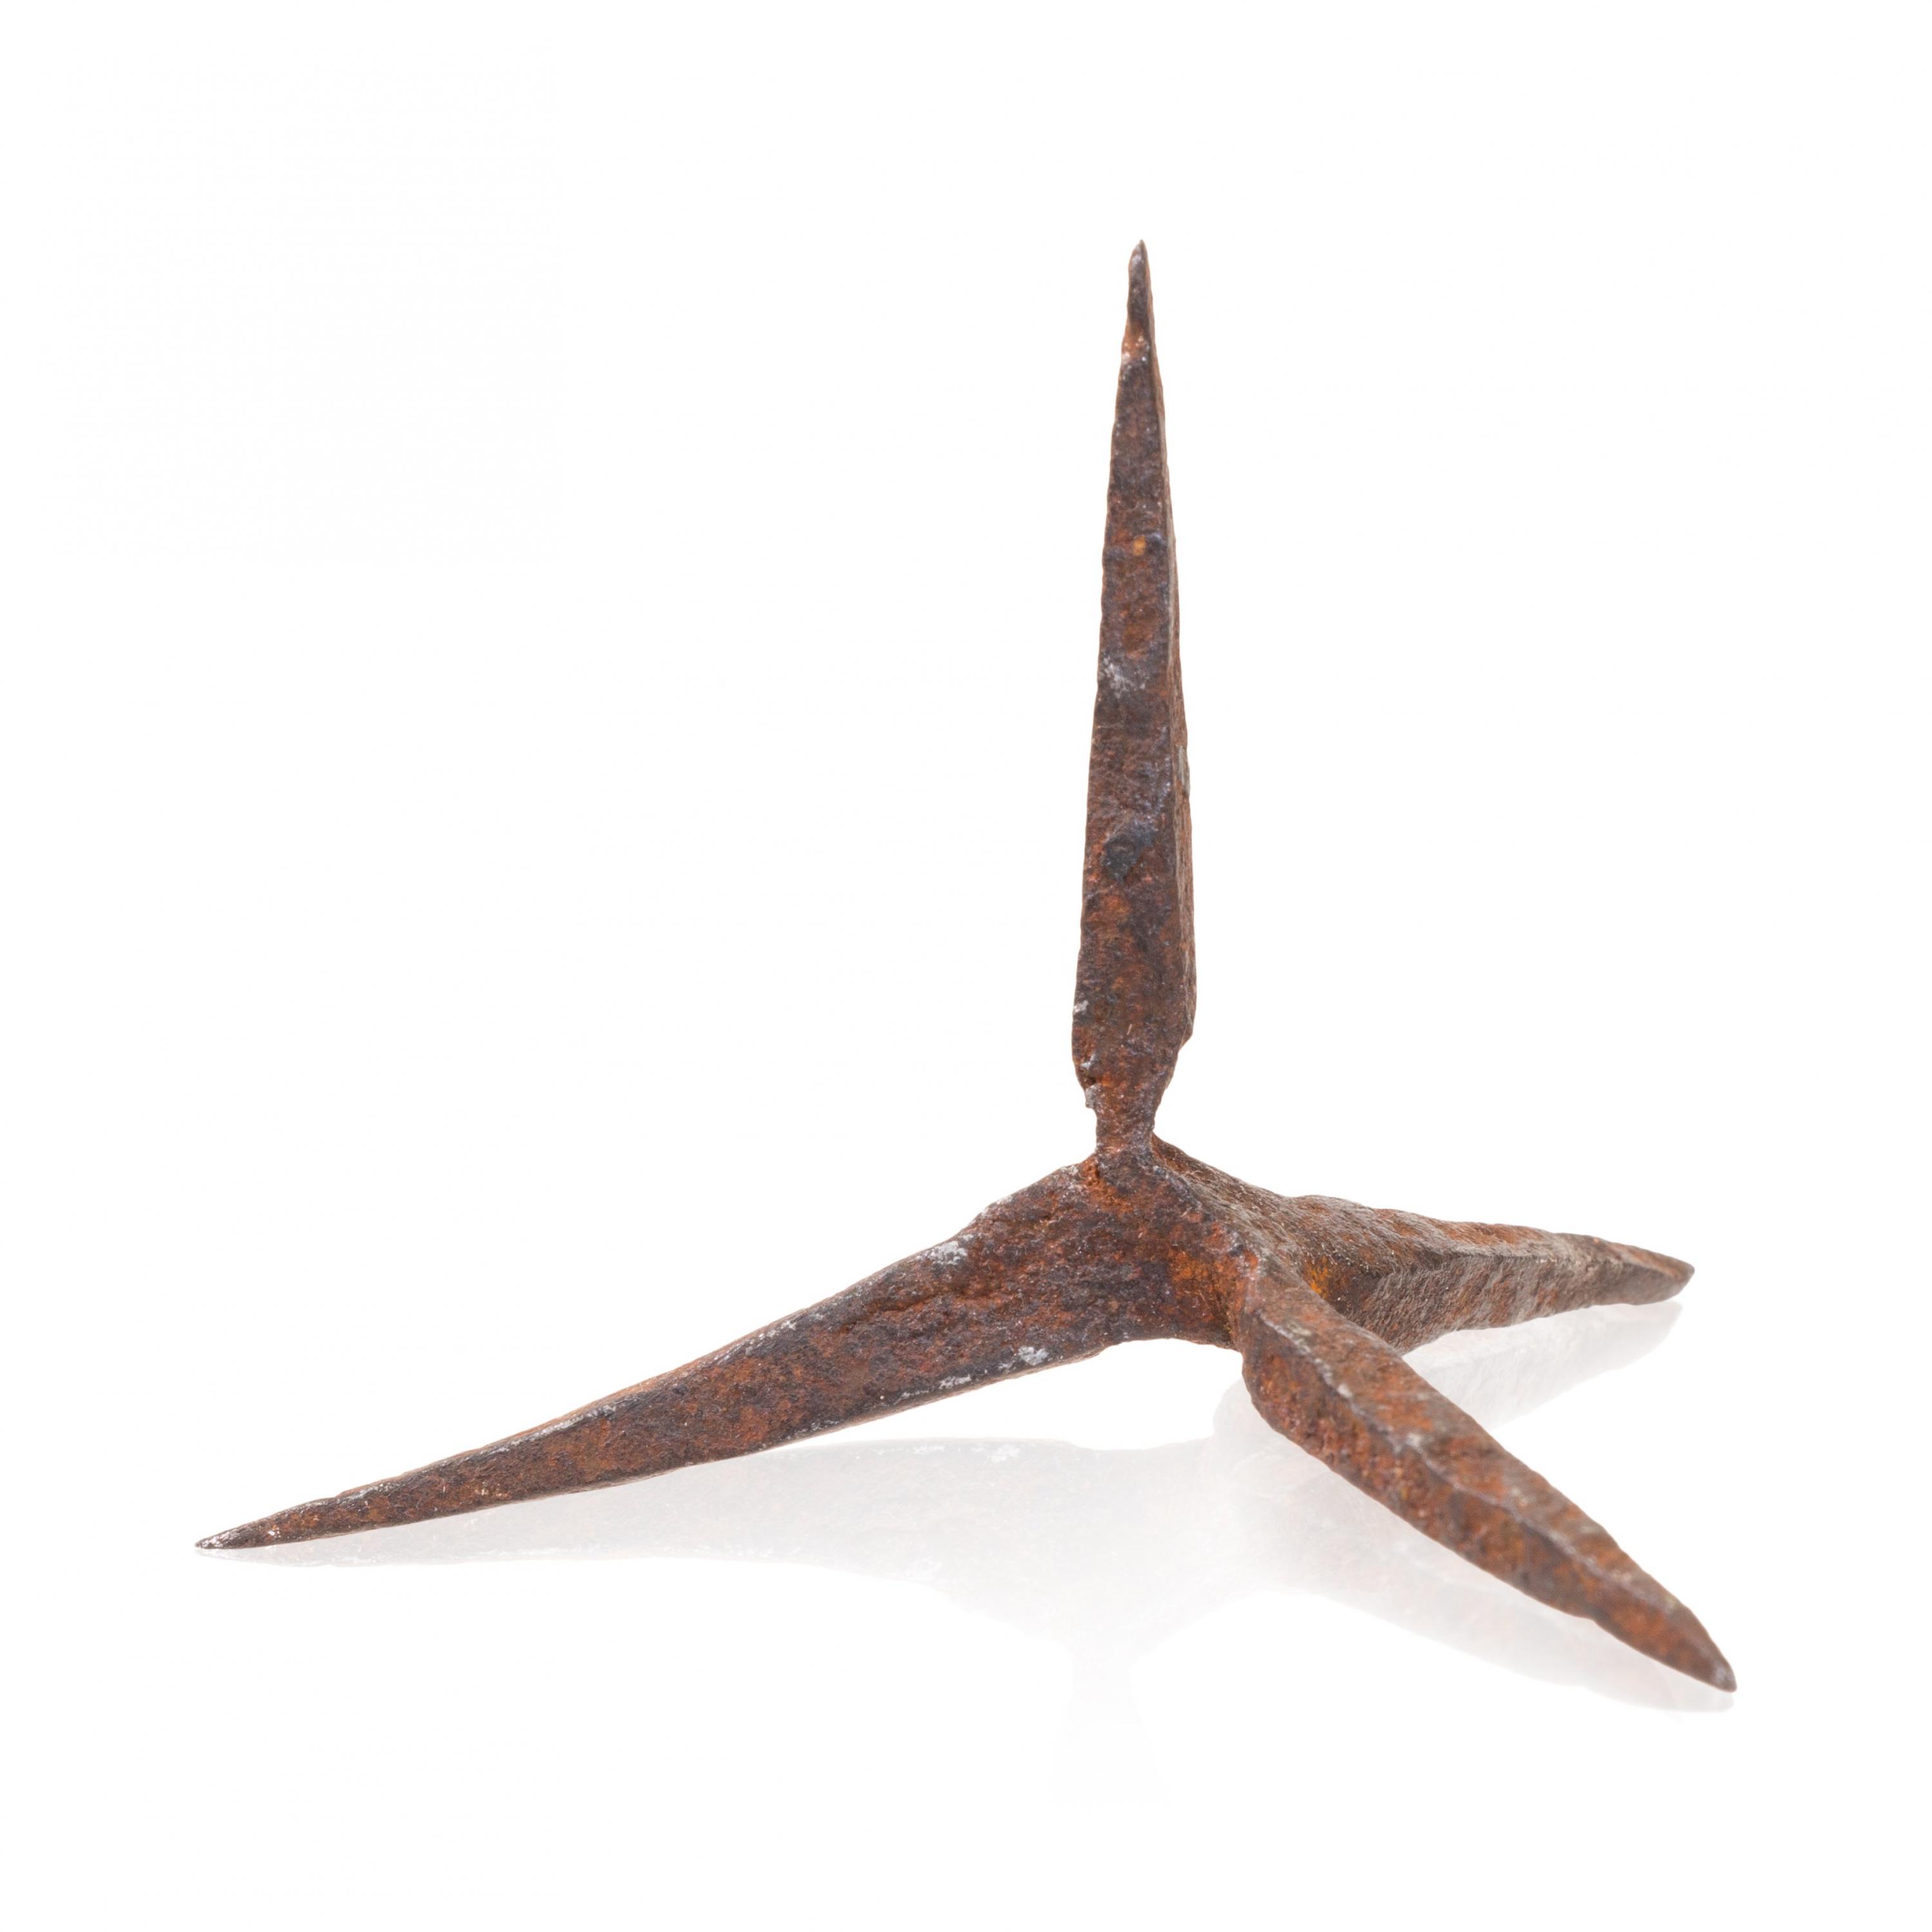 A caltrop sits at the ready [Photo Credit: Cisco Gallery]